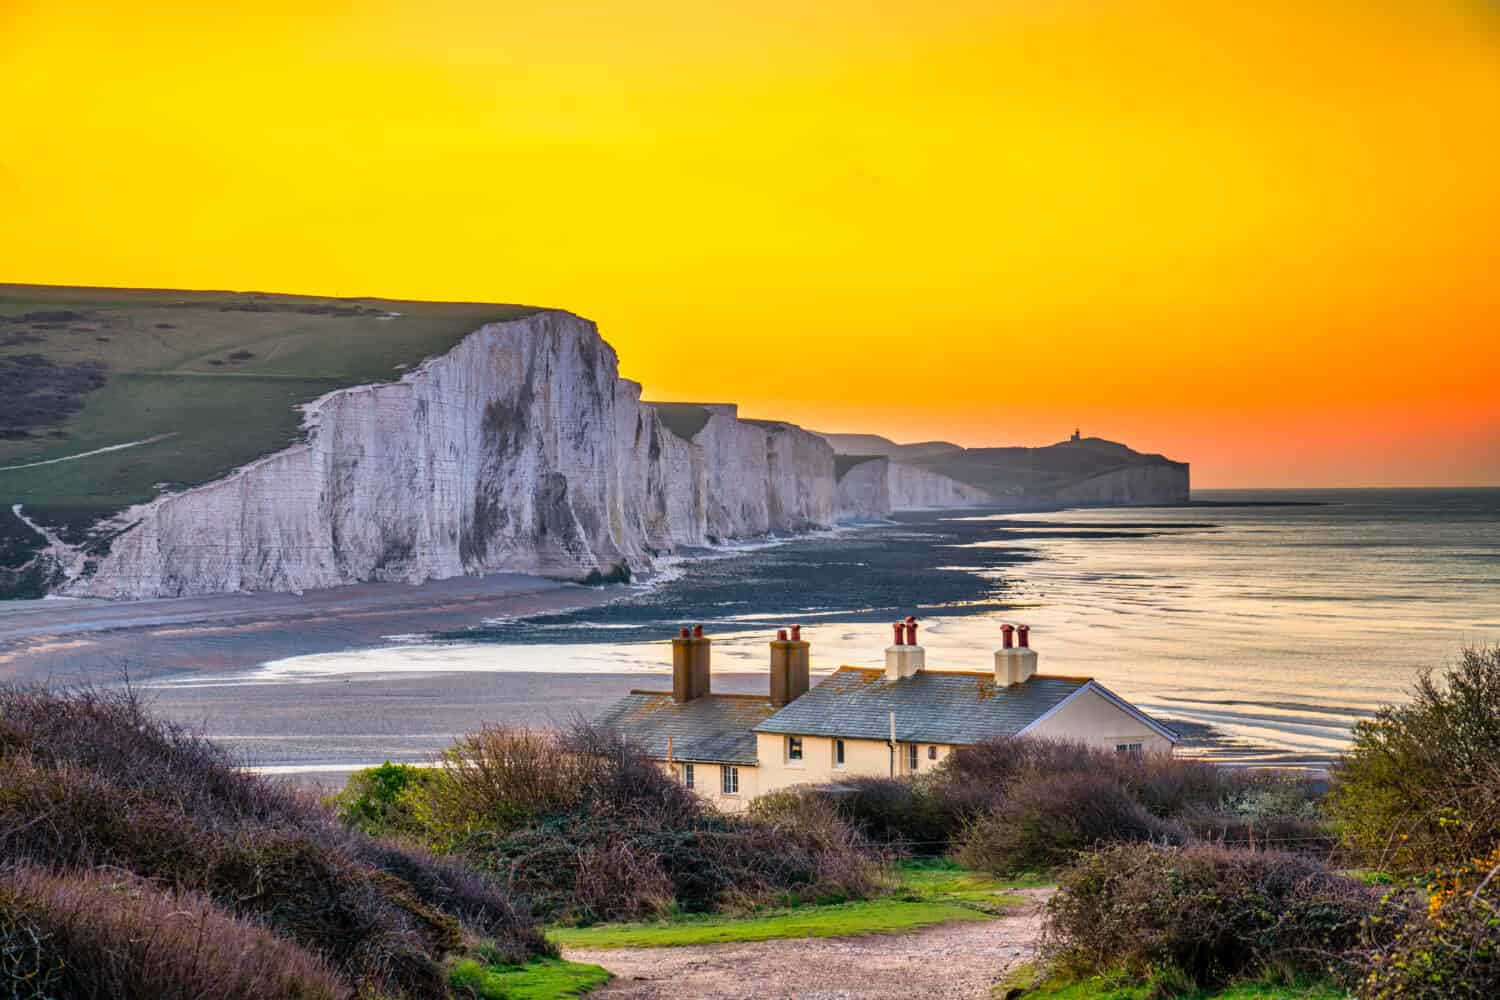 The Coast Guard Cottages and Seven Sisters Chalk Cliffs at sunrise in Sussex, England, UK